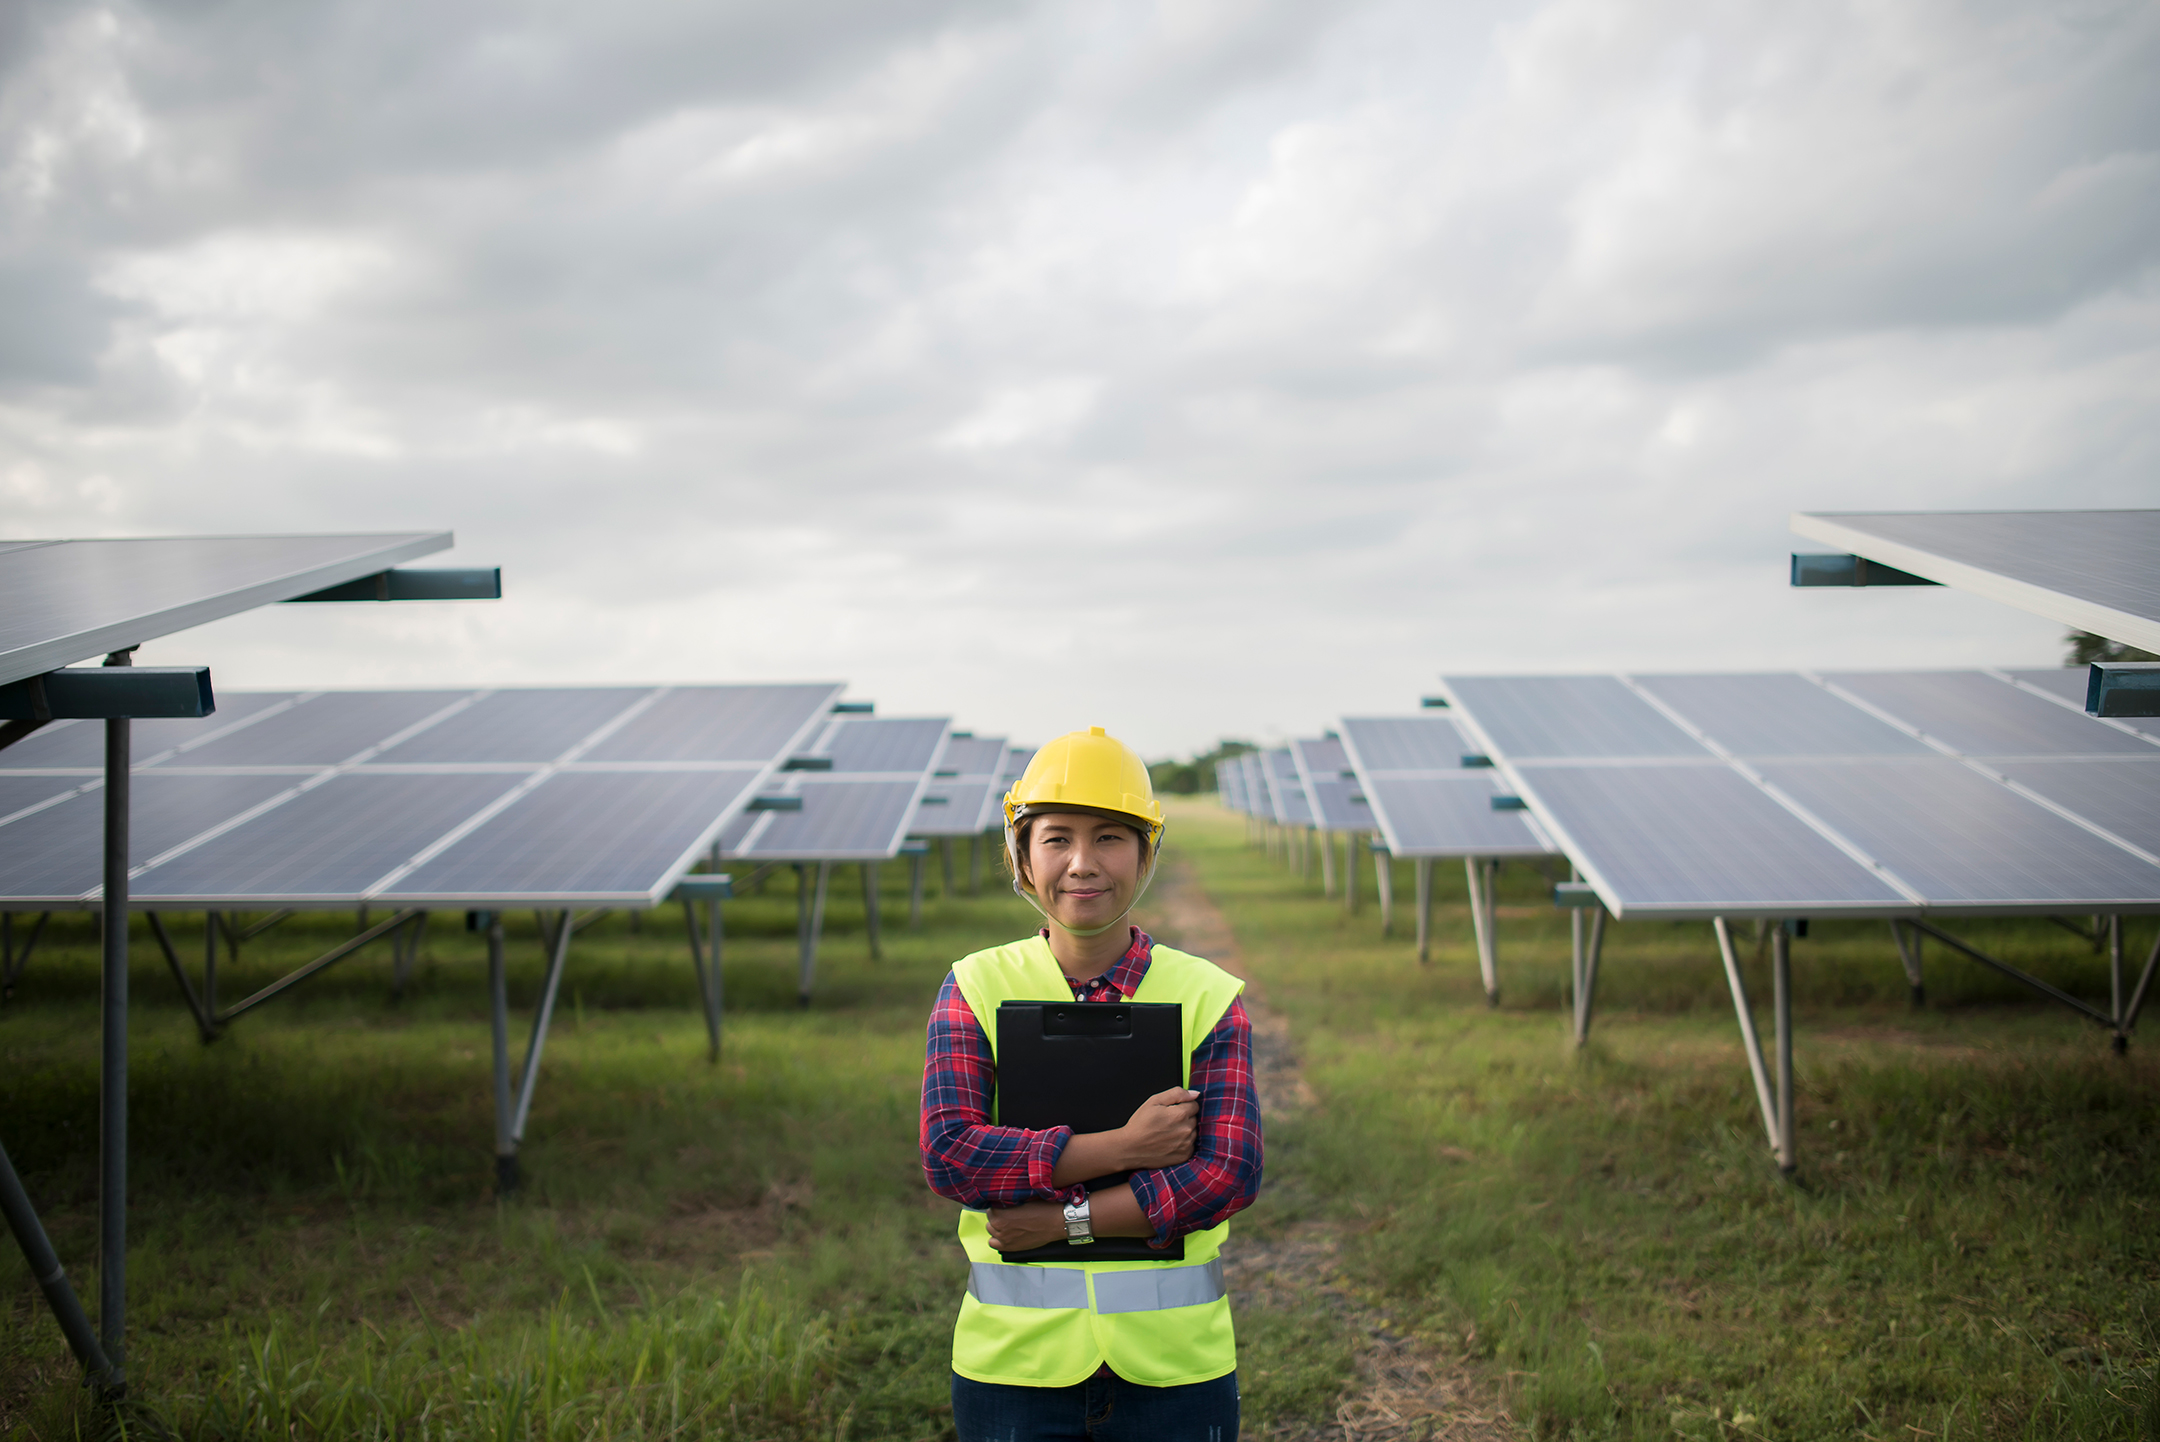 a woman in a hard hat and work vest stands in a field, clutching a cipboard, with two rows of solar panels behind her